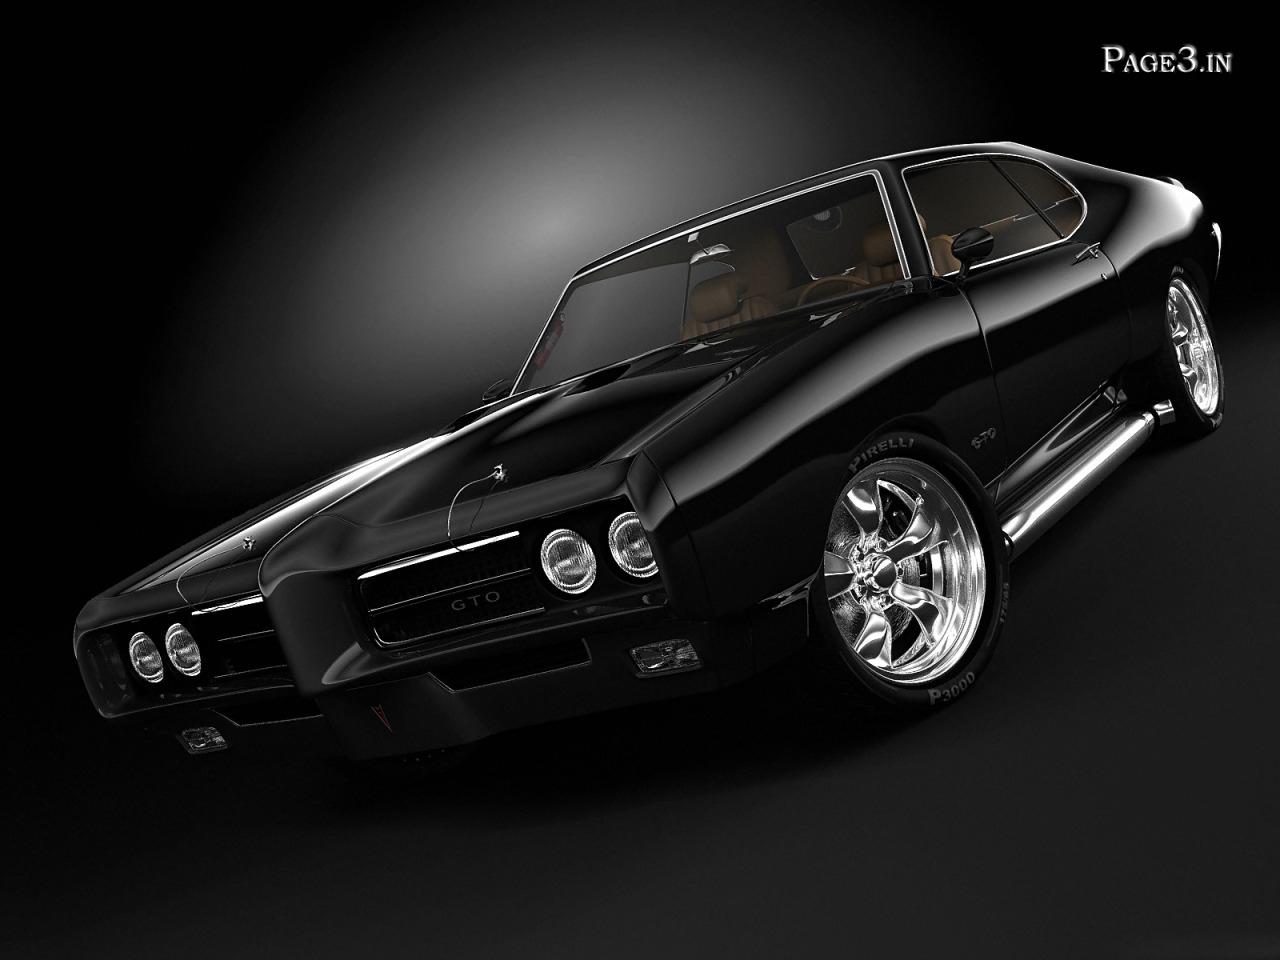 New Car Photo cool muscle cars wallpaper 1280x960